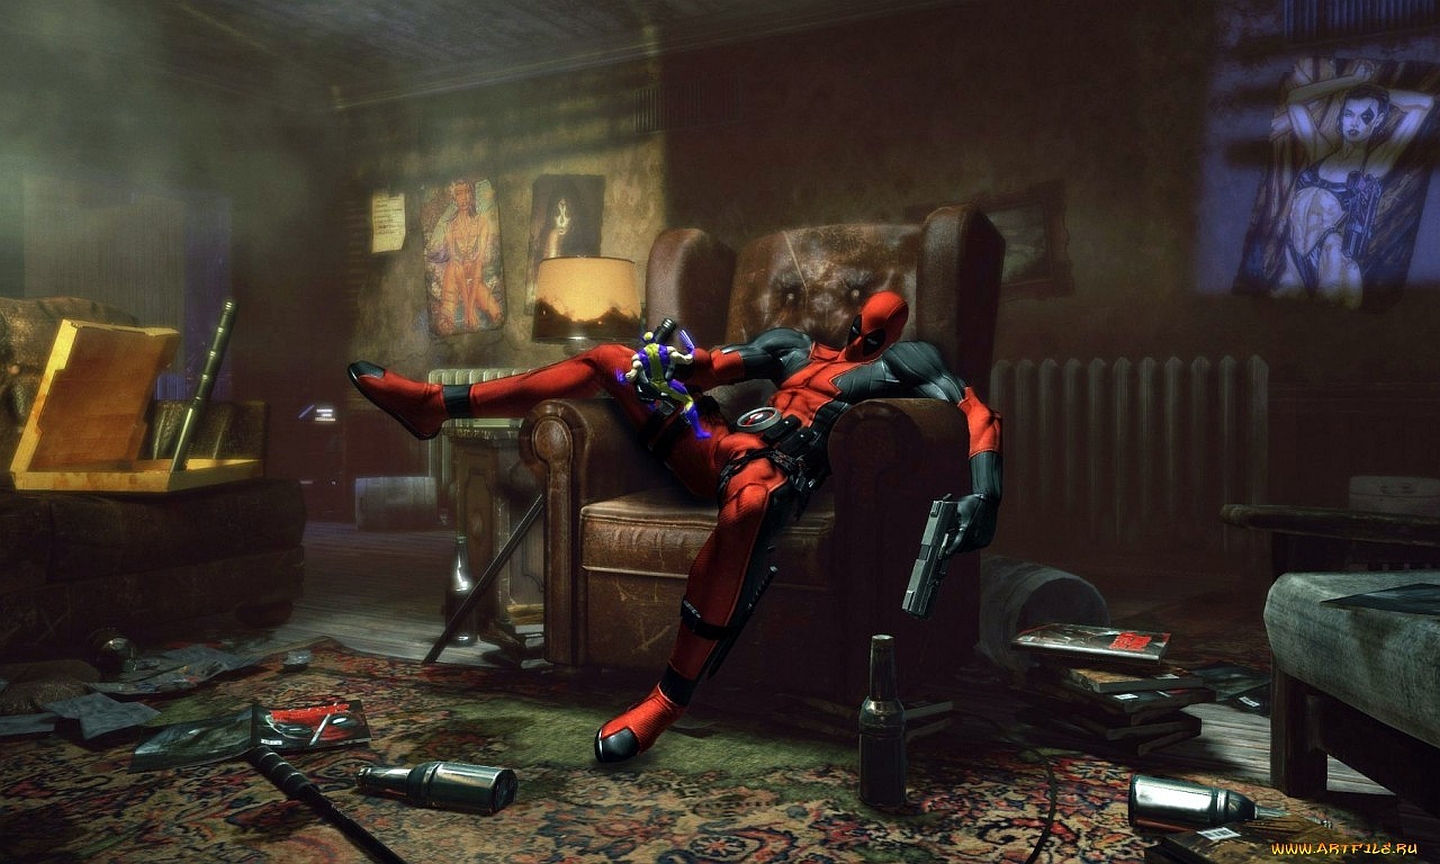 Deadpool Pc Game Free Download